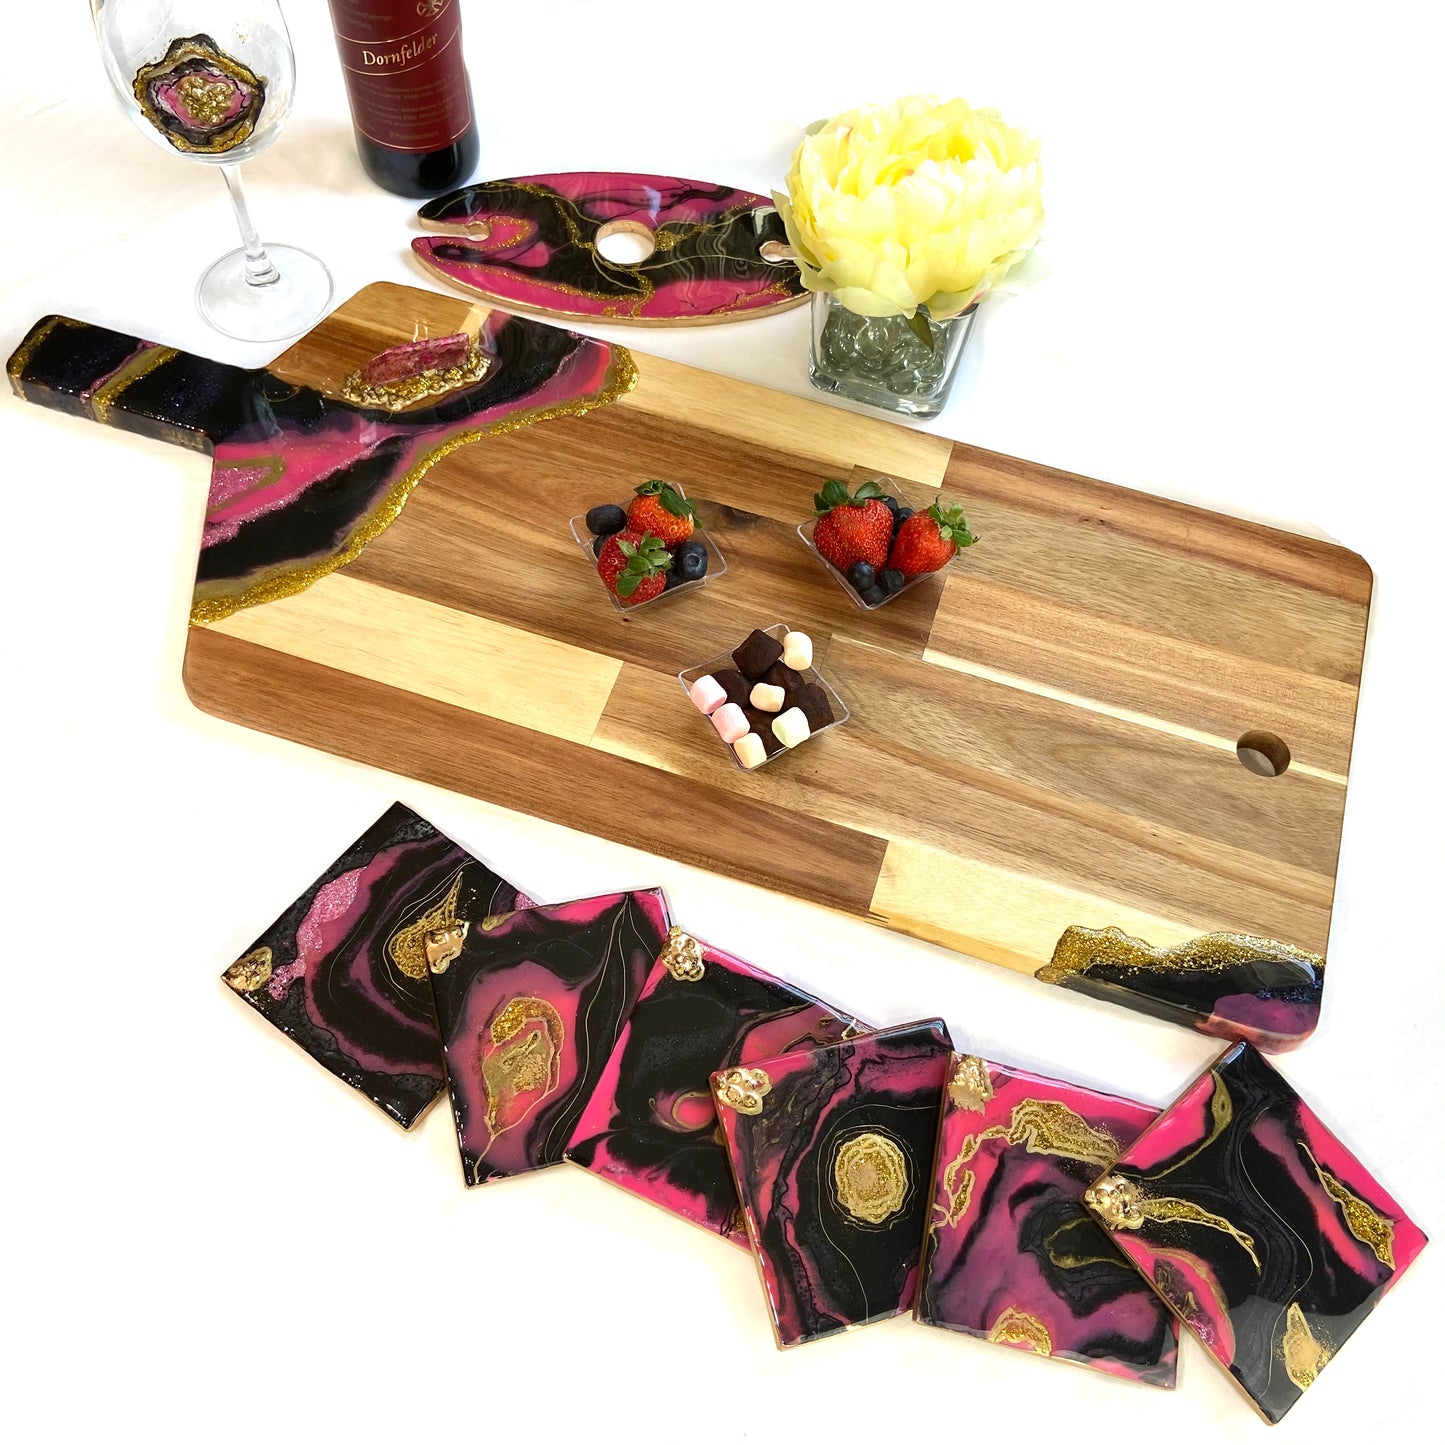 Hot Pink and Black Geode Serving Board - Large